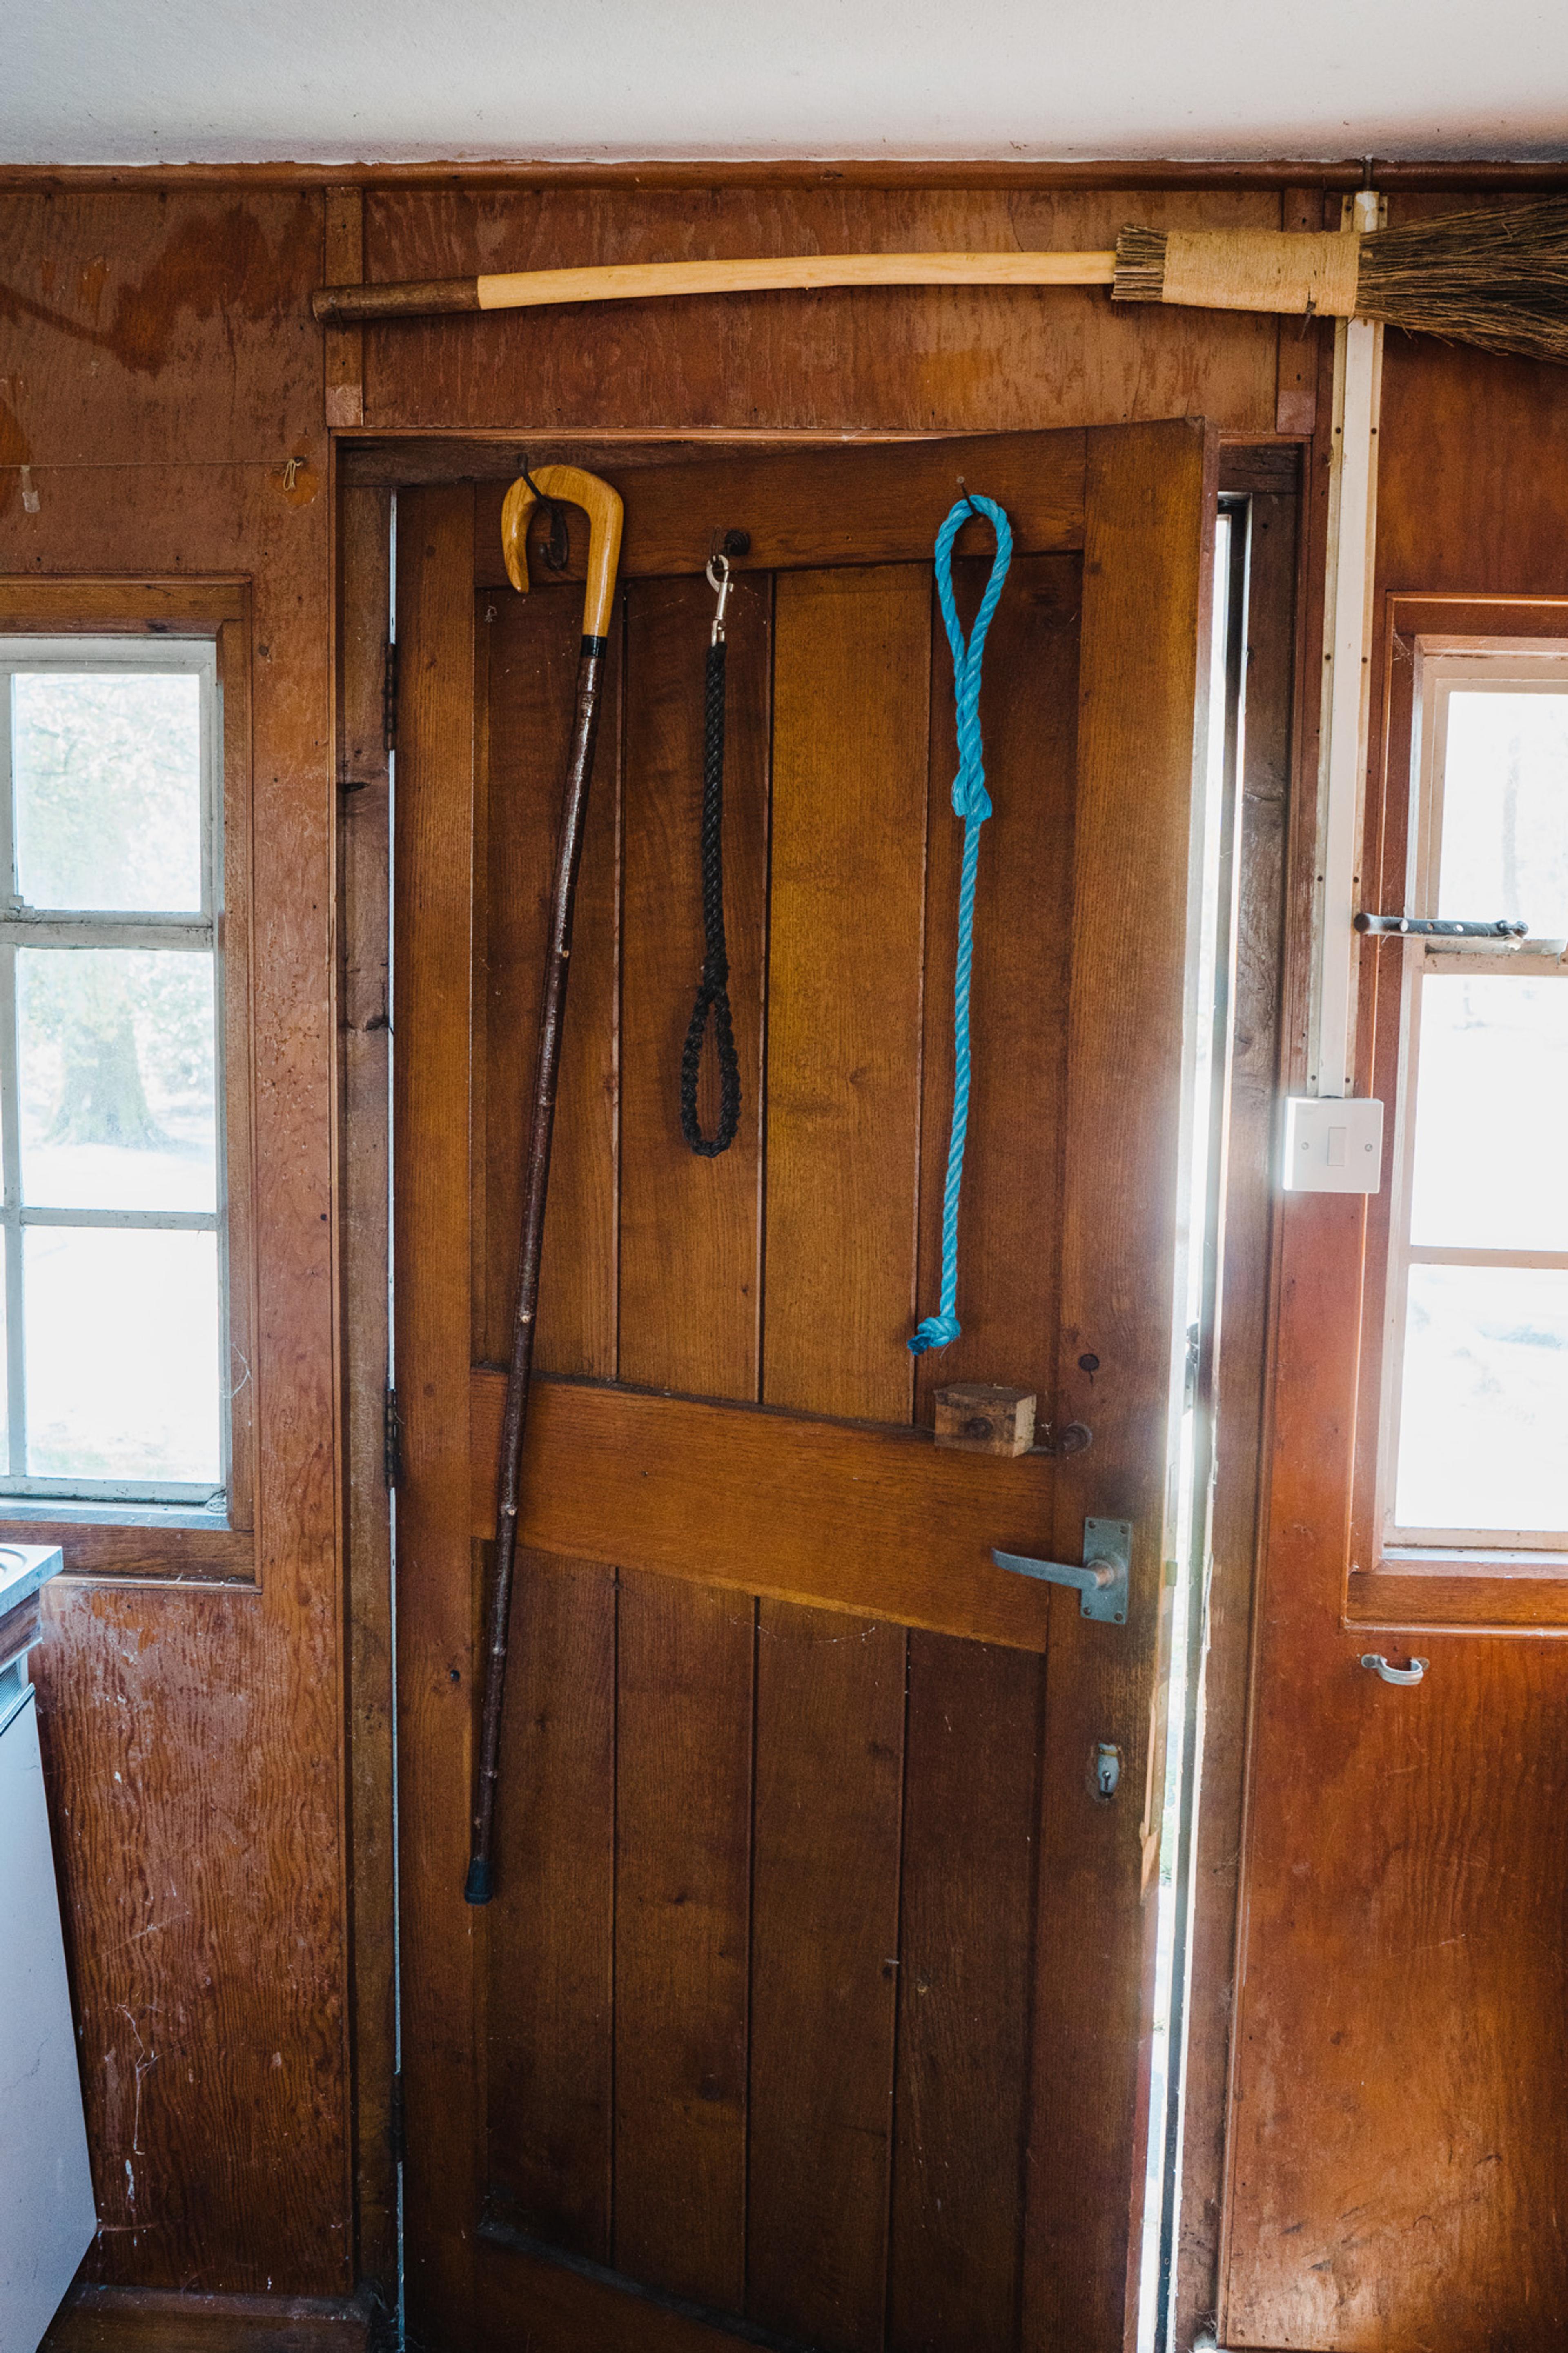 A wooden door with a cane and two dog leads hanging on it, and a broom hung on the wall above the door